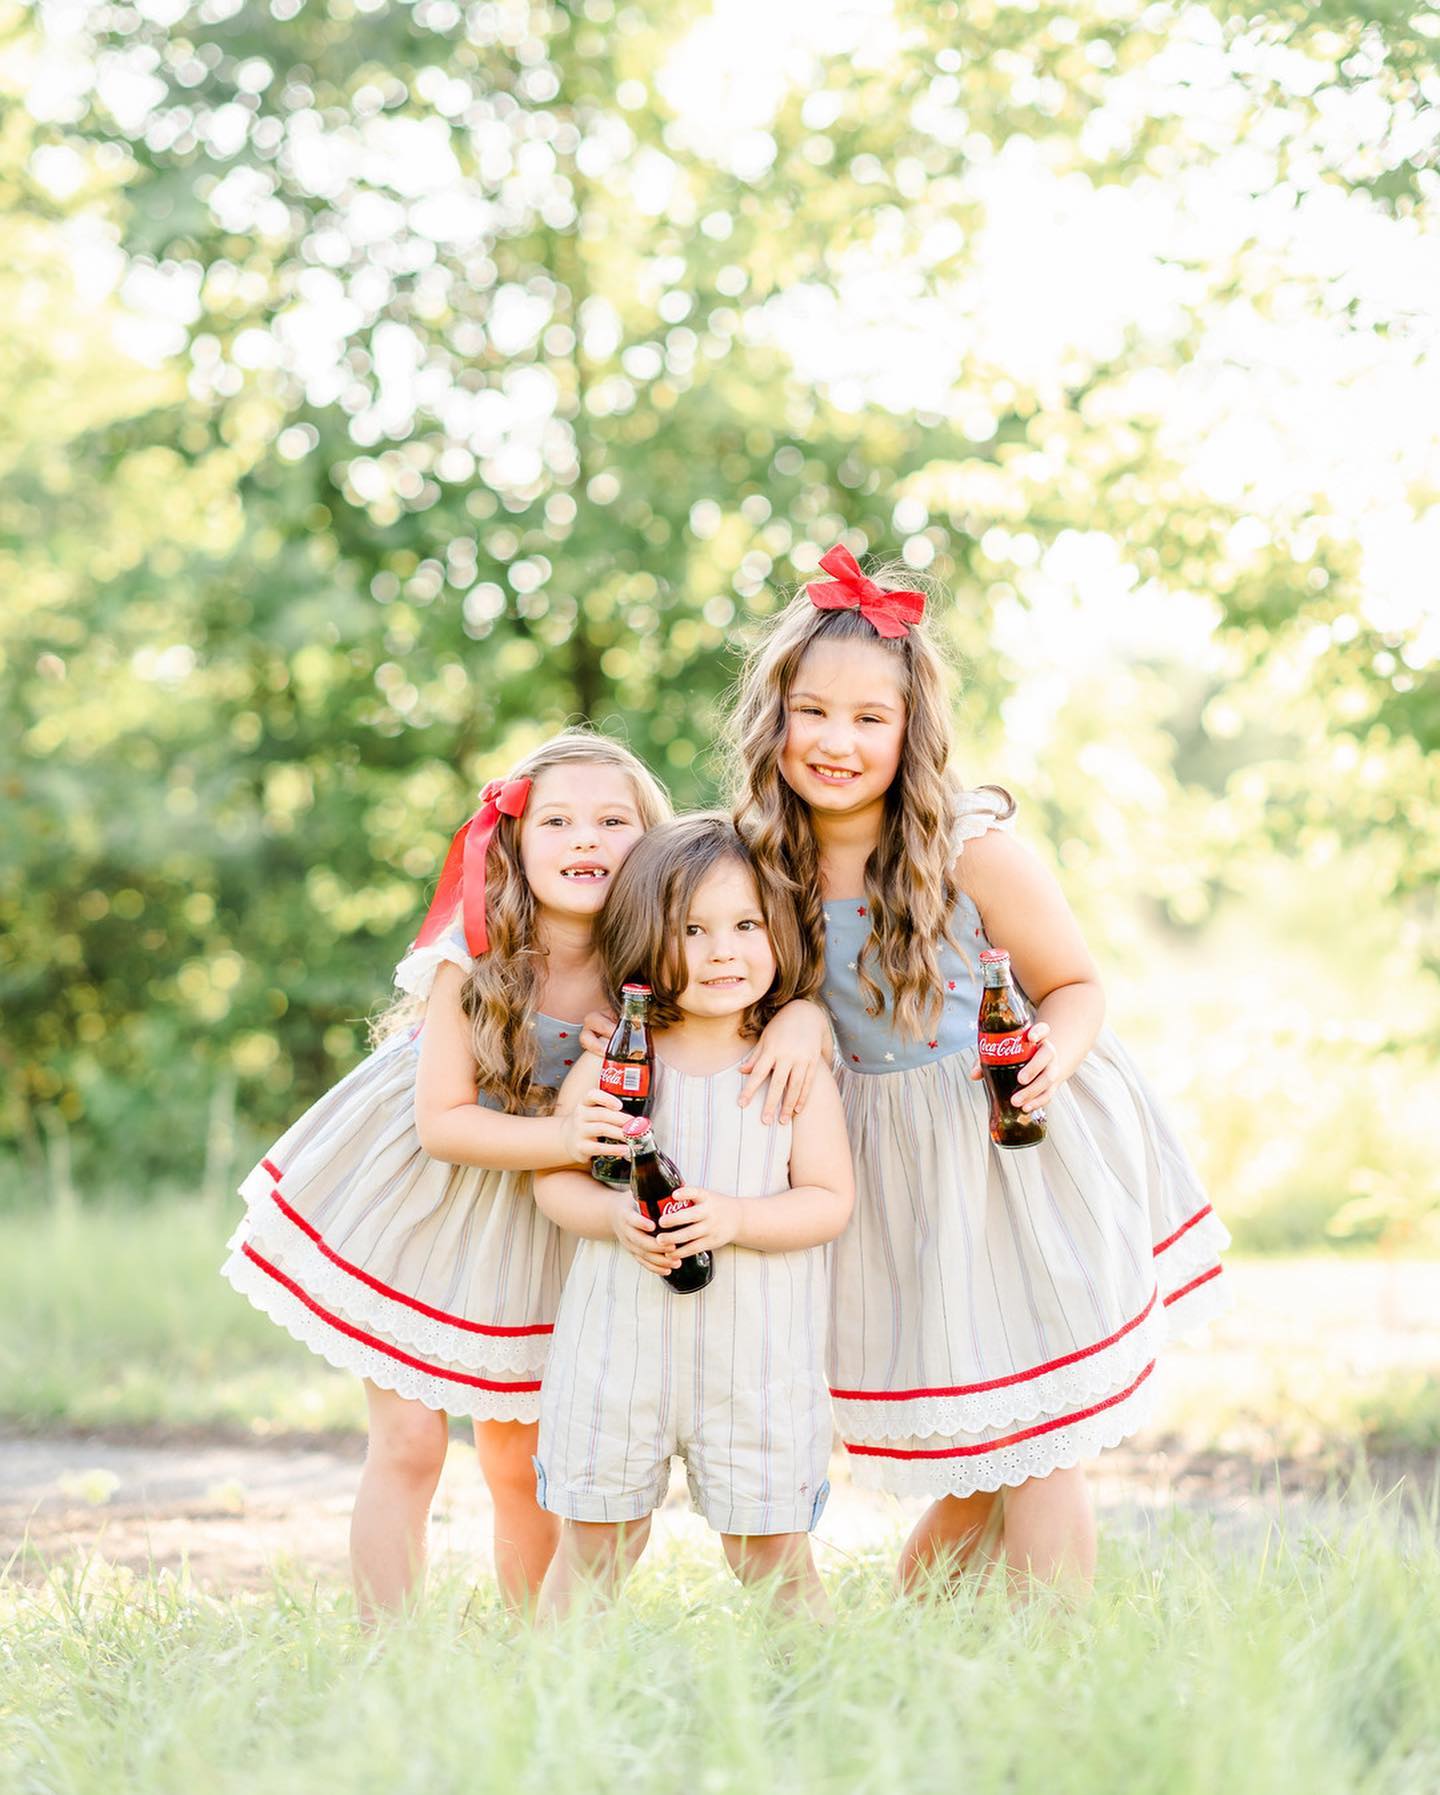 Outdoor Children's 4th Of July Photography Session